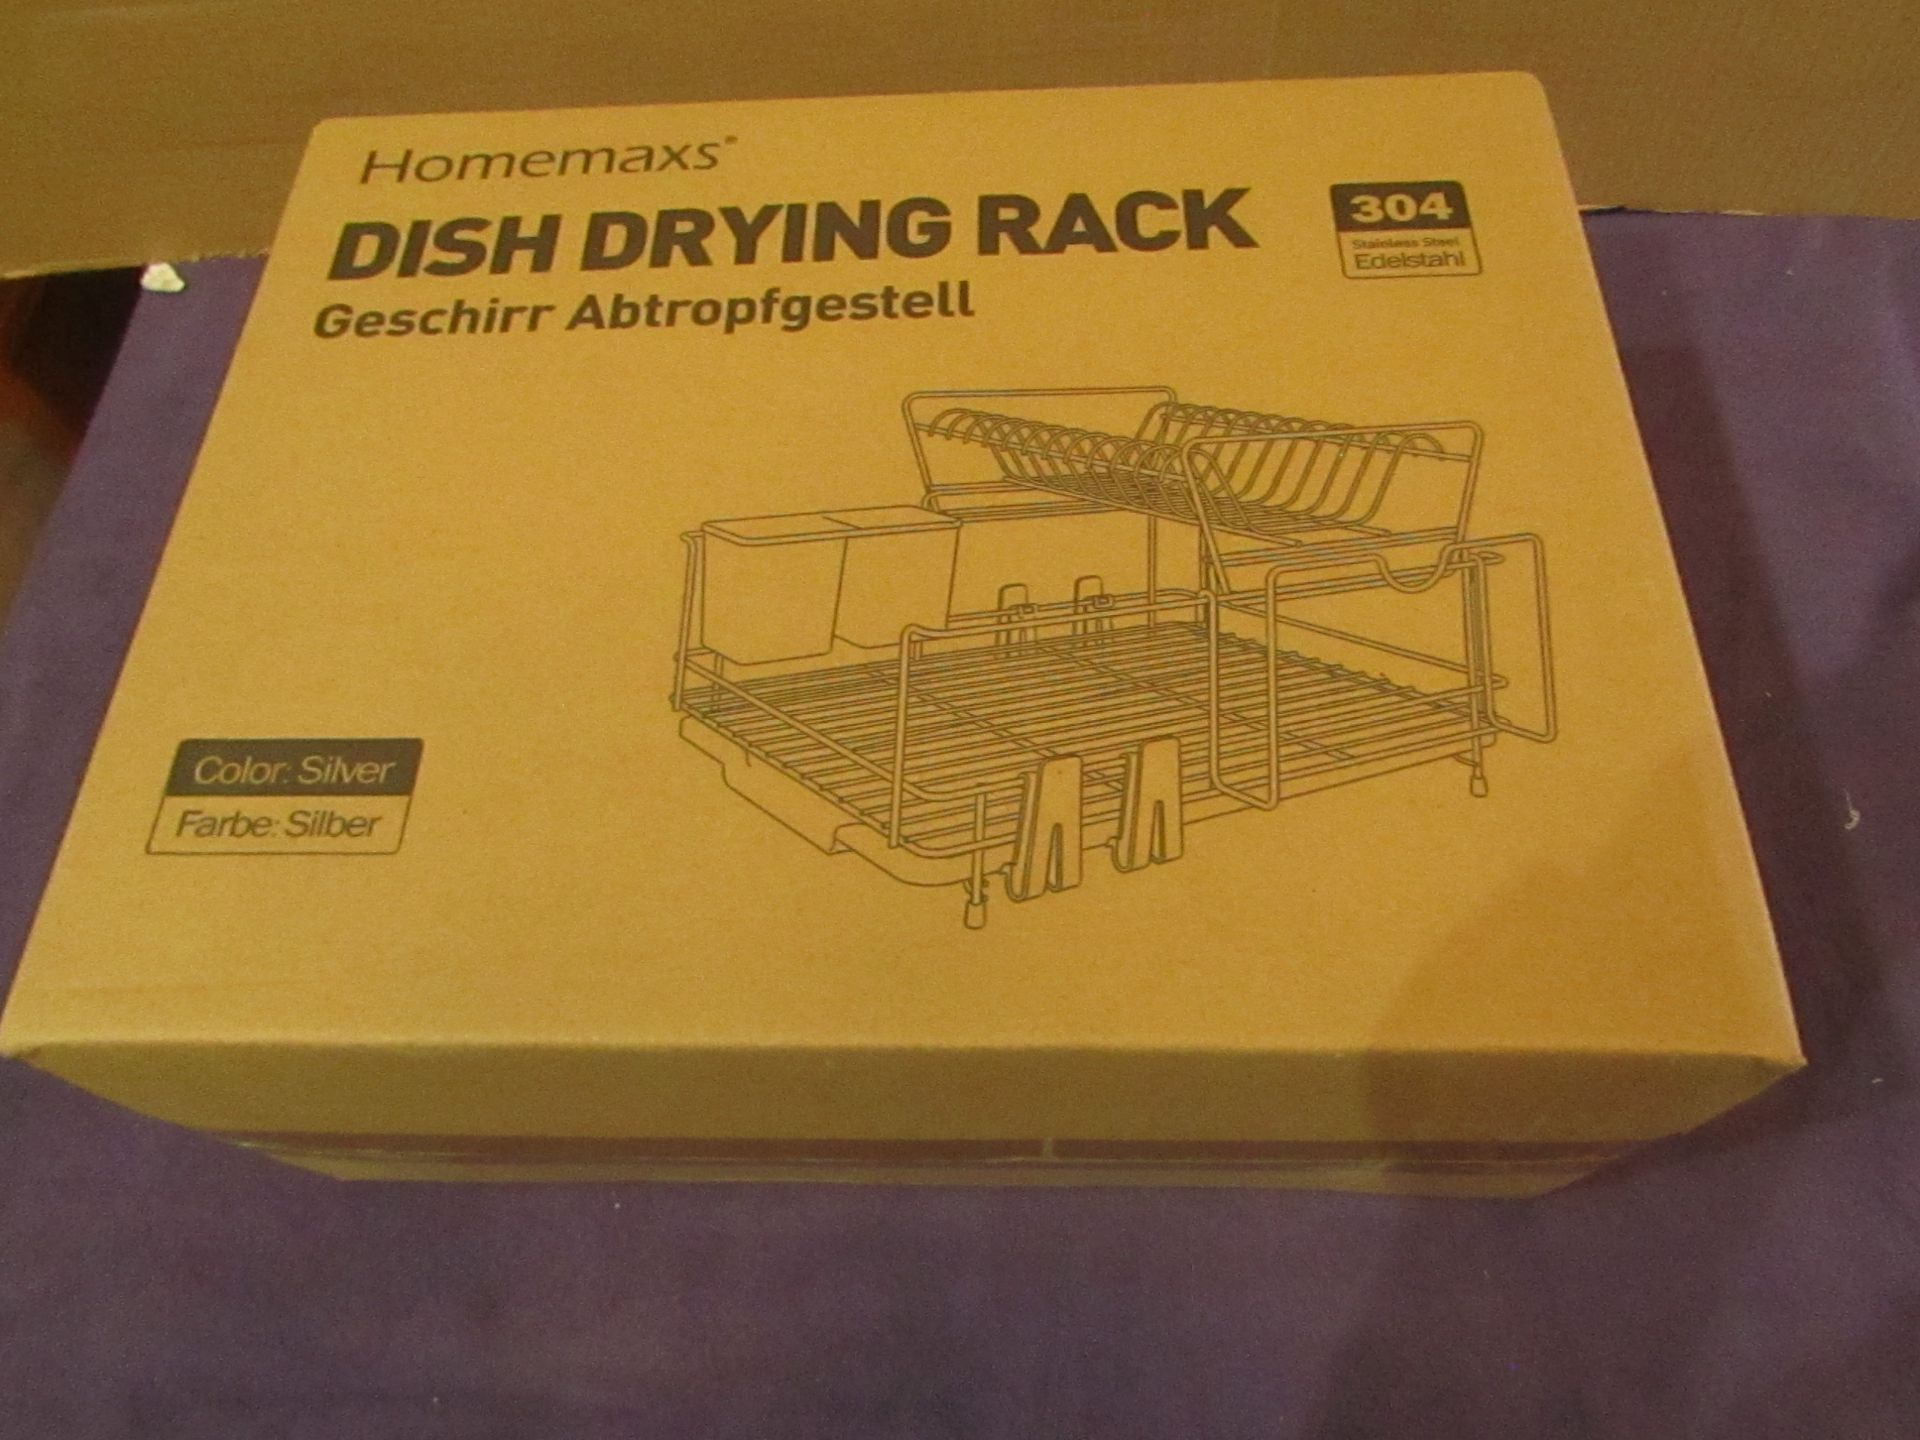 HOMEMAXS - Dish Drying Rack Stainless Steel Dish Drainer - New & Boxed.